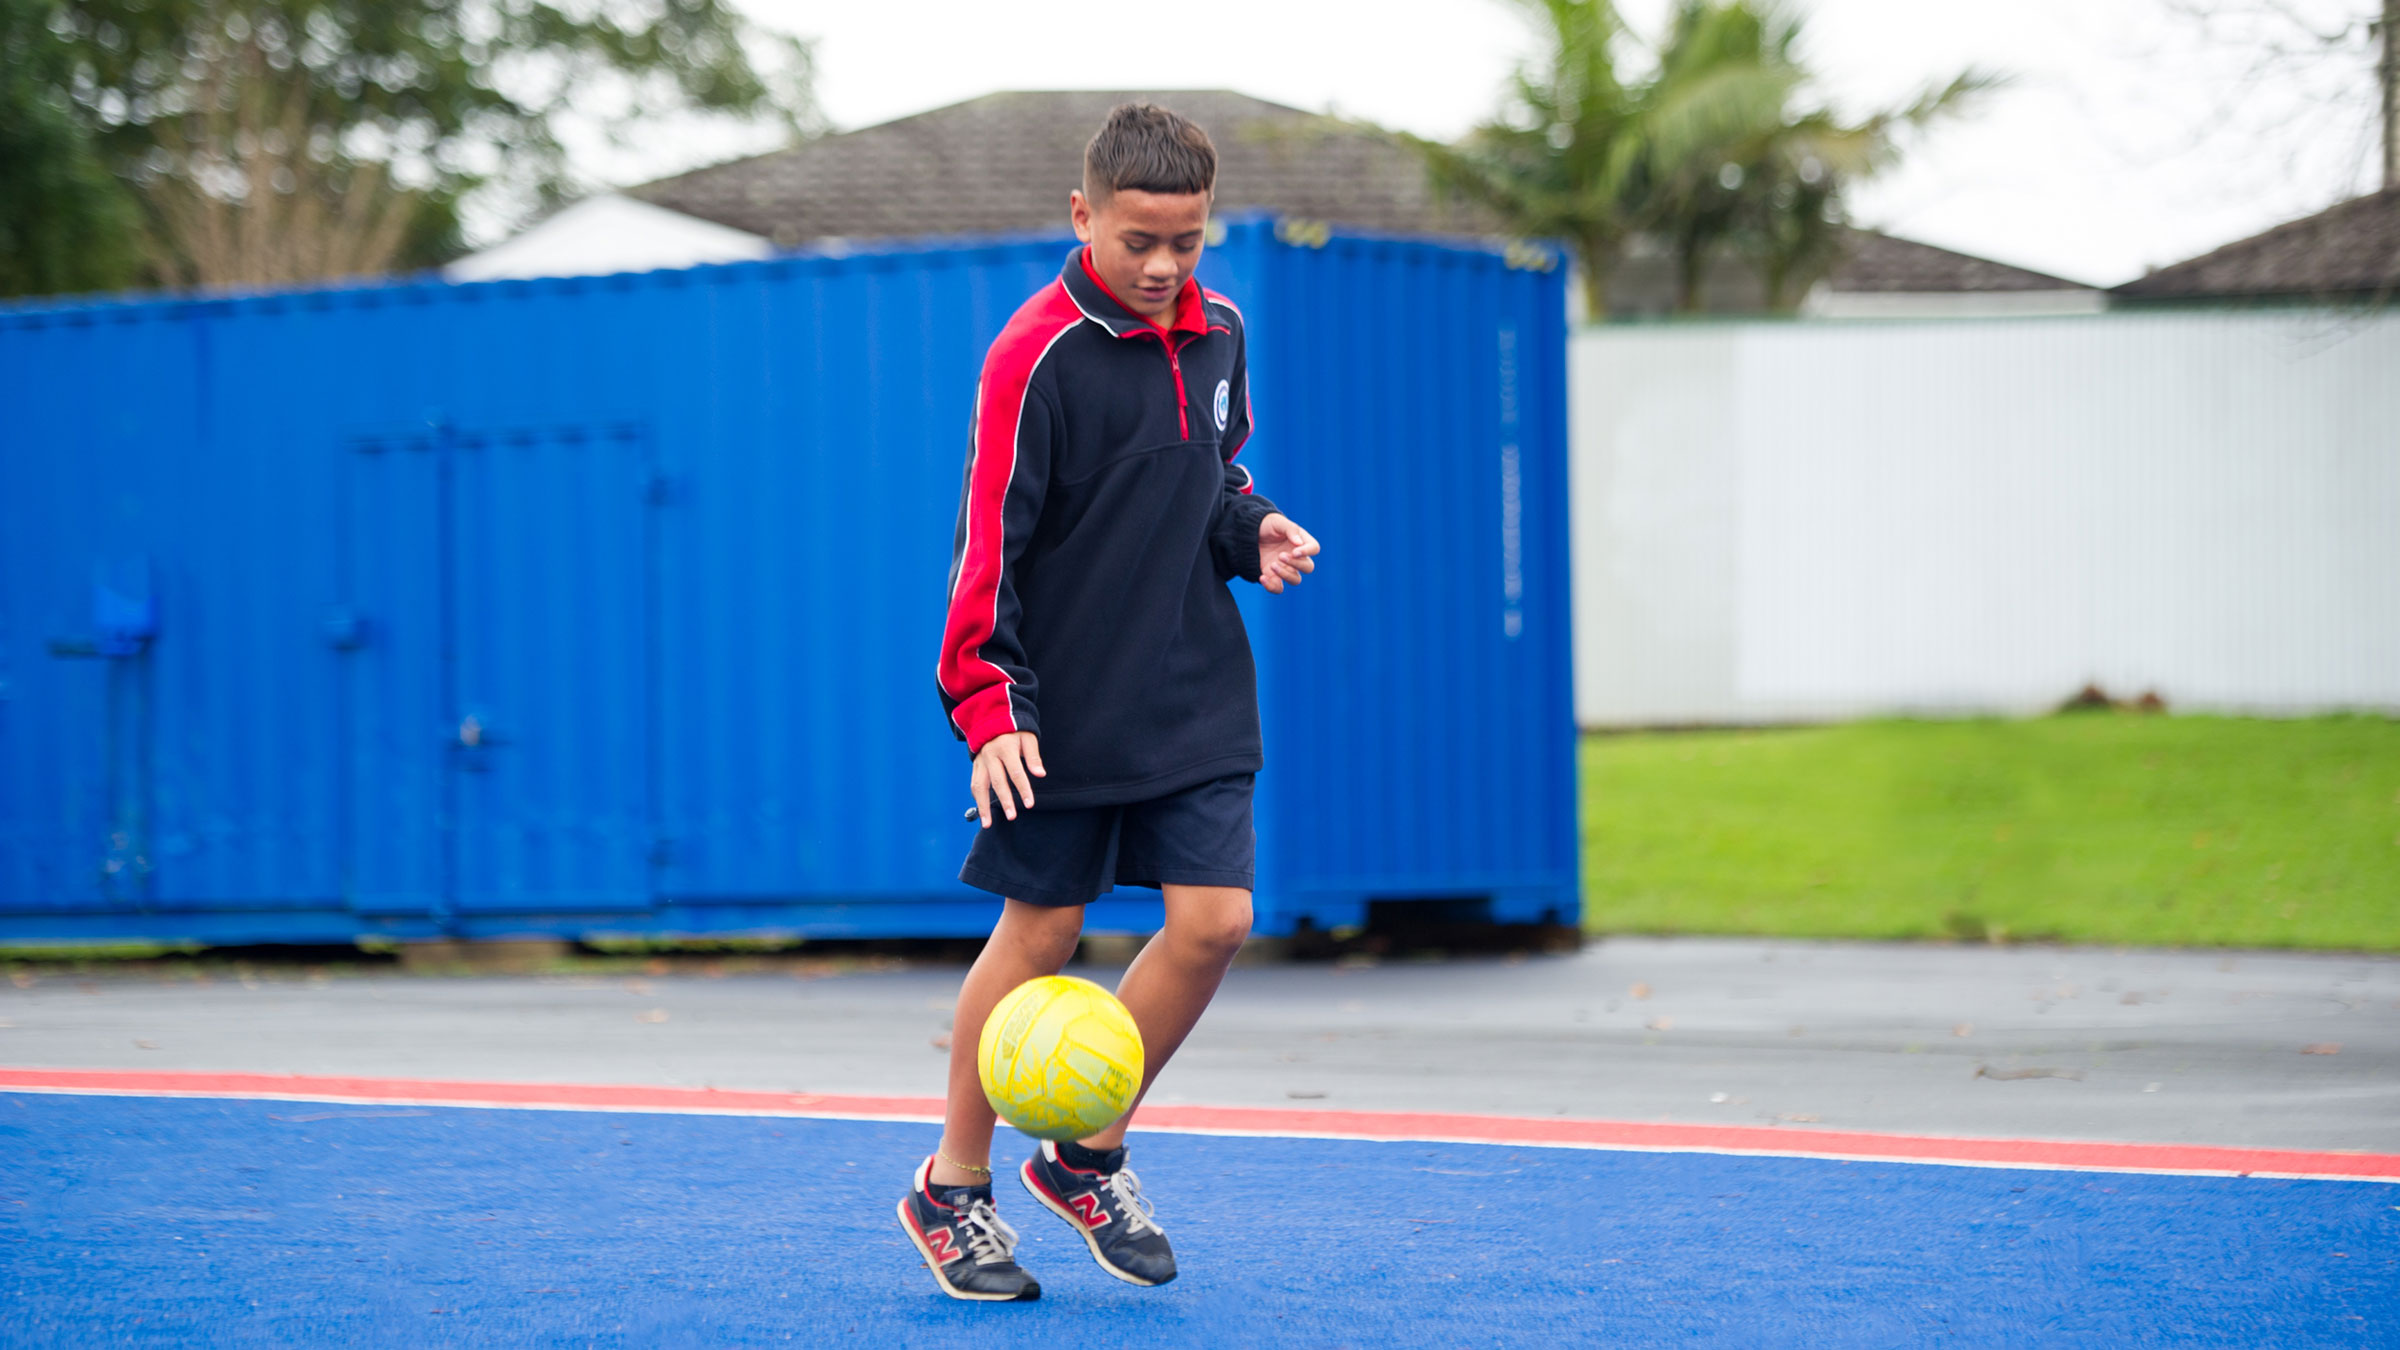 An intermediate-aged student dribbling a football outdoors